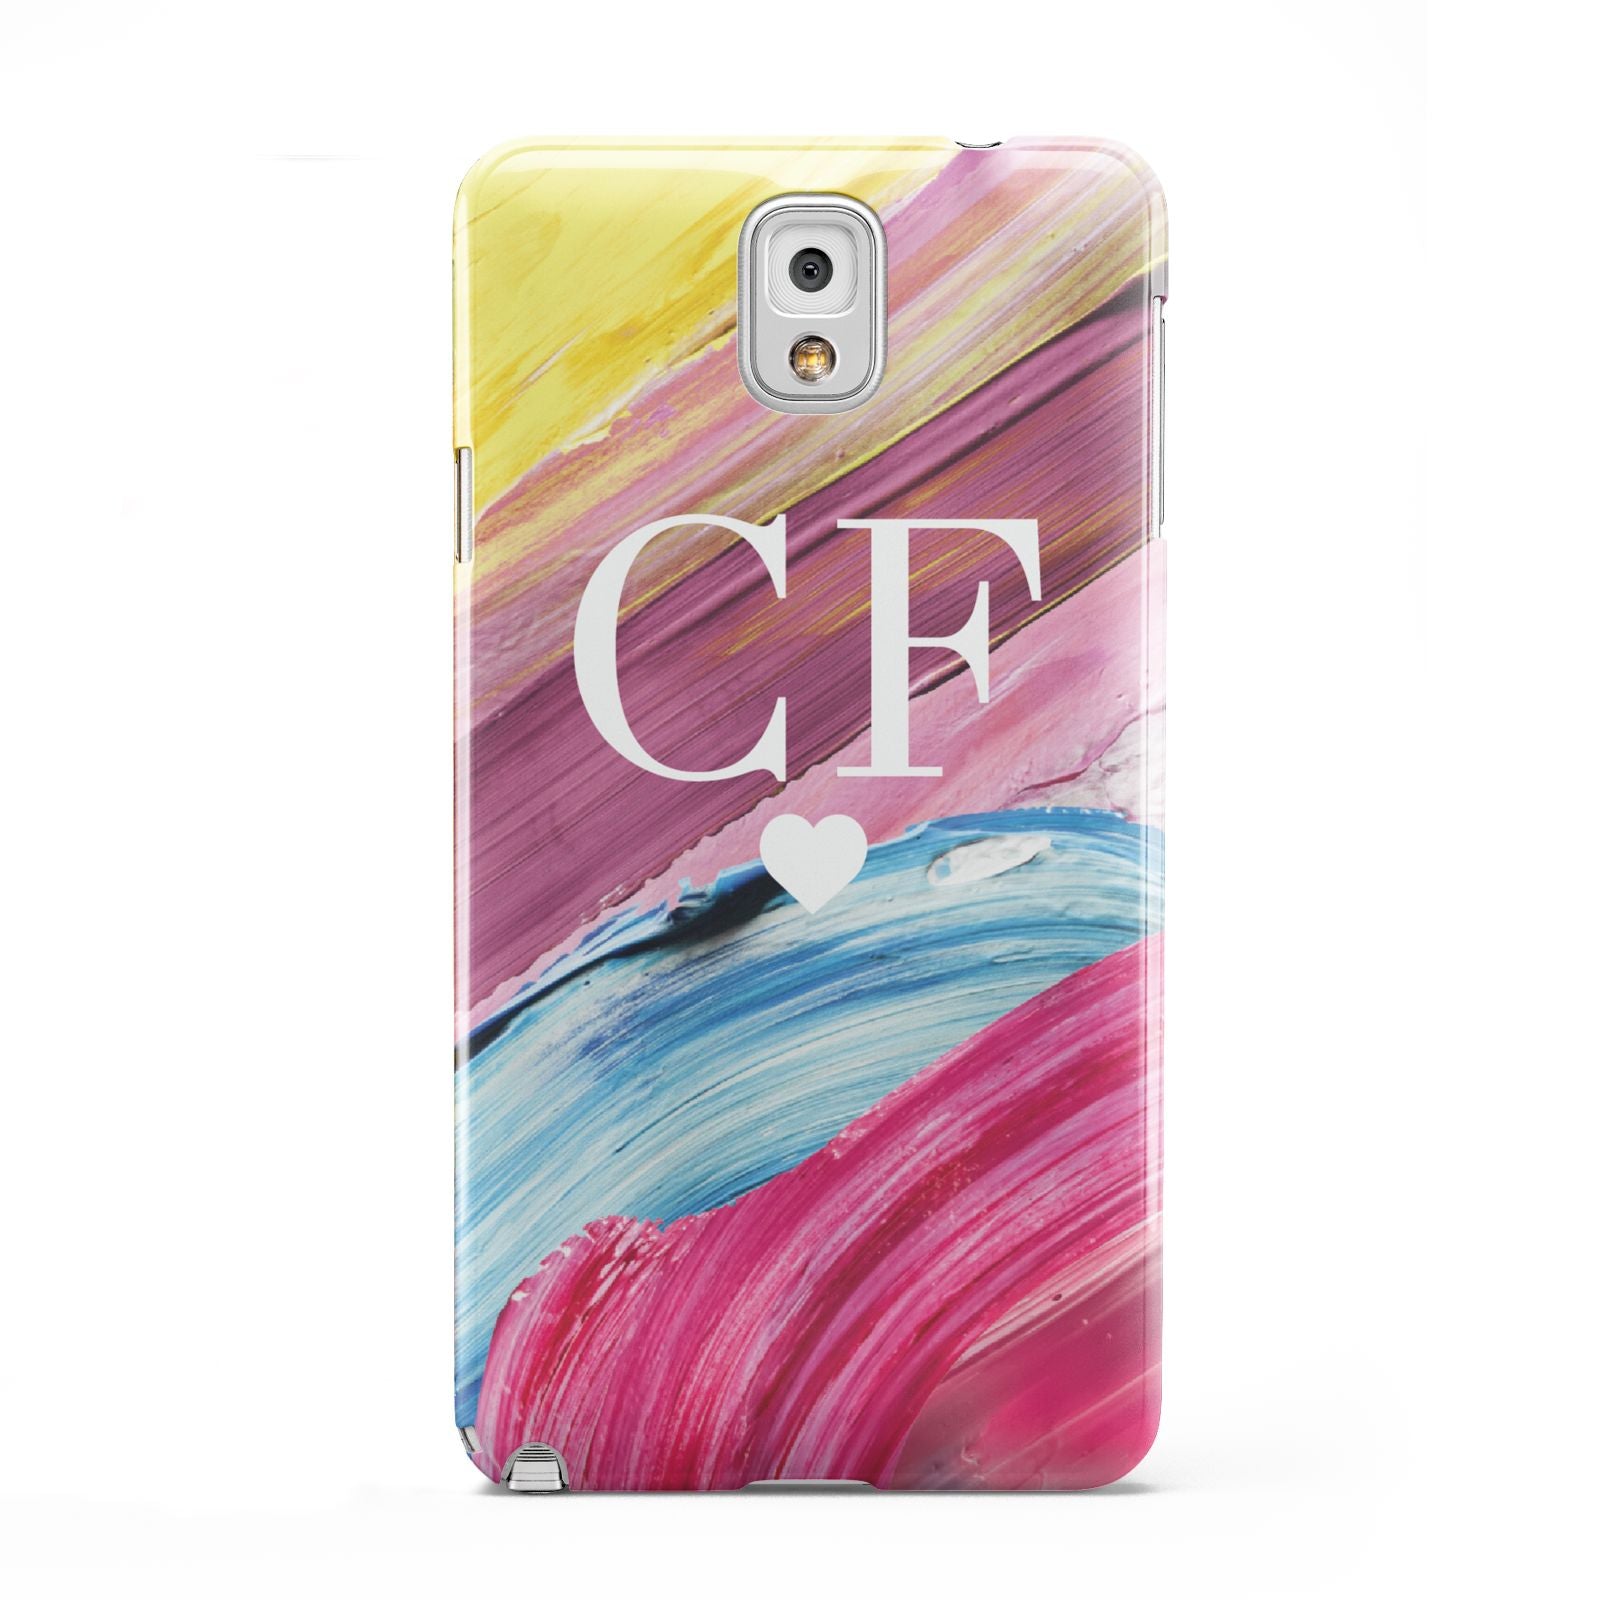 Personalised Paint Brush Initials Samsung Galaxy Note 3 Case